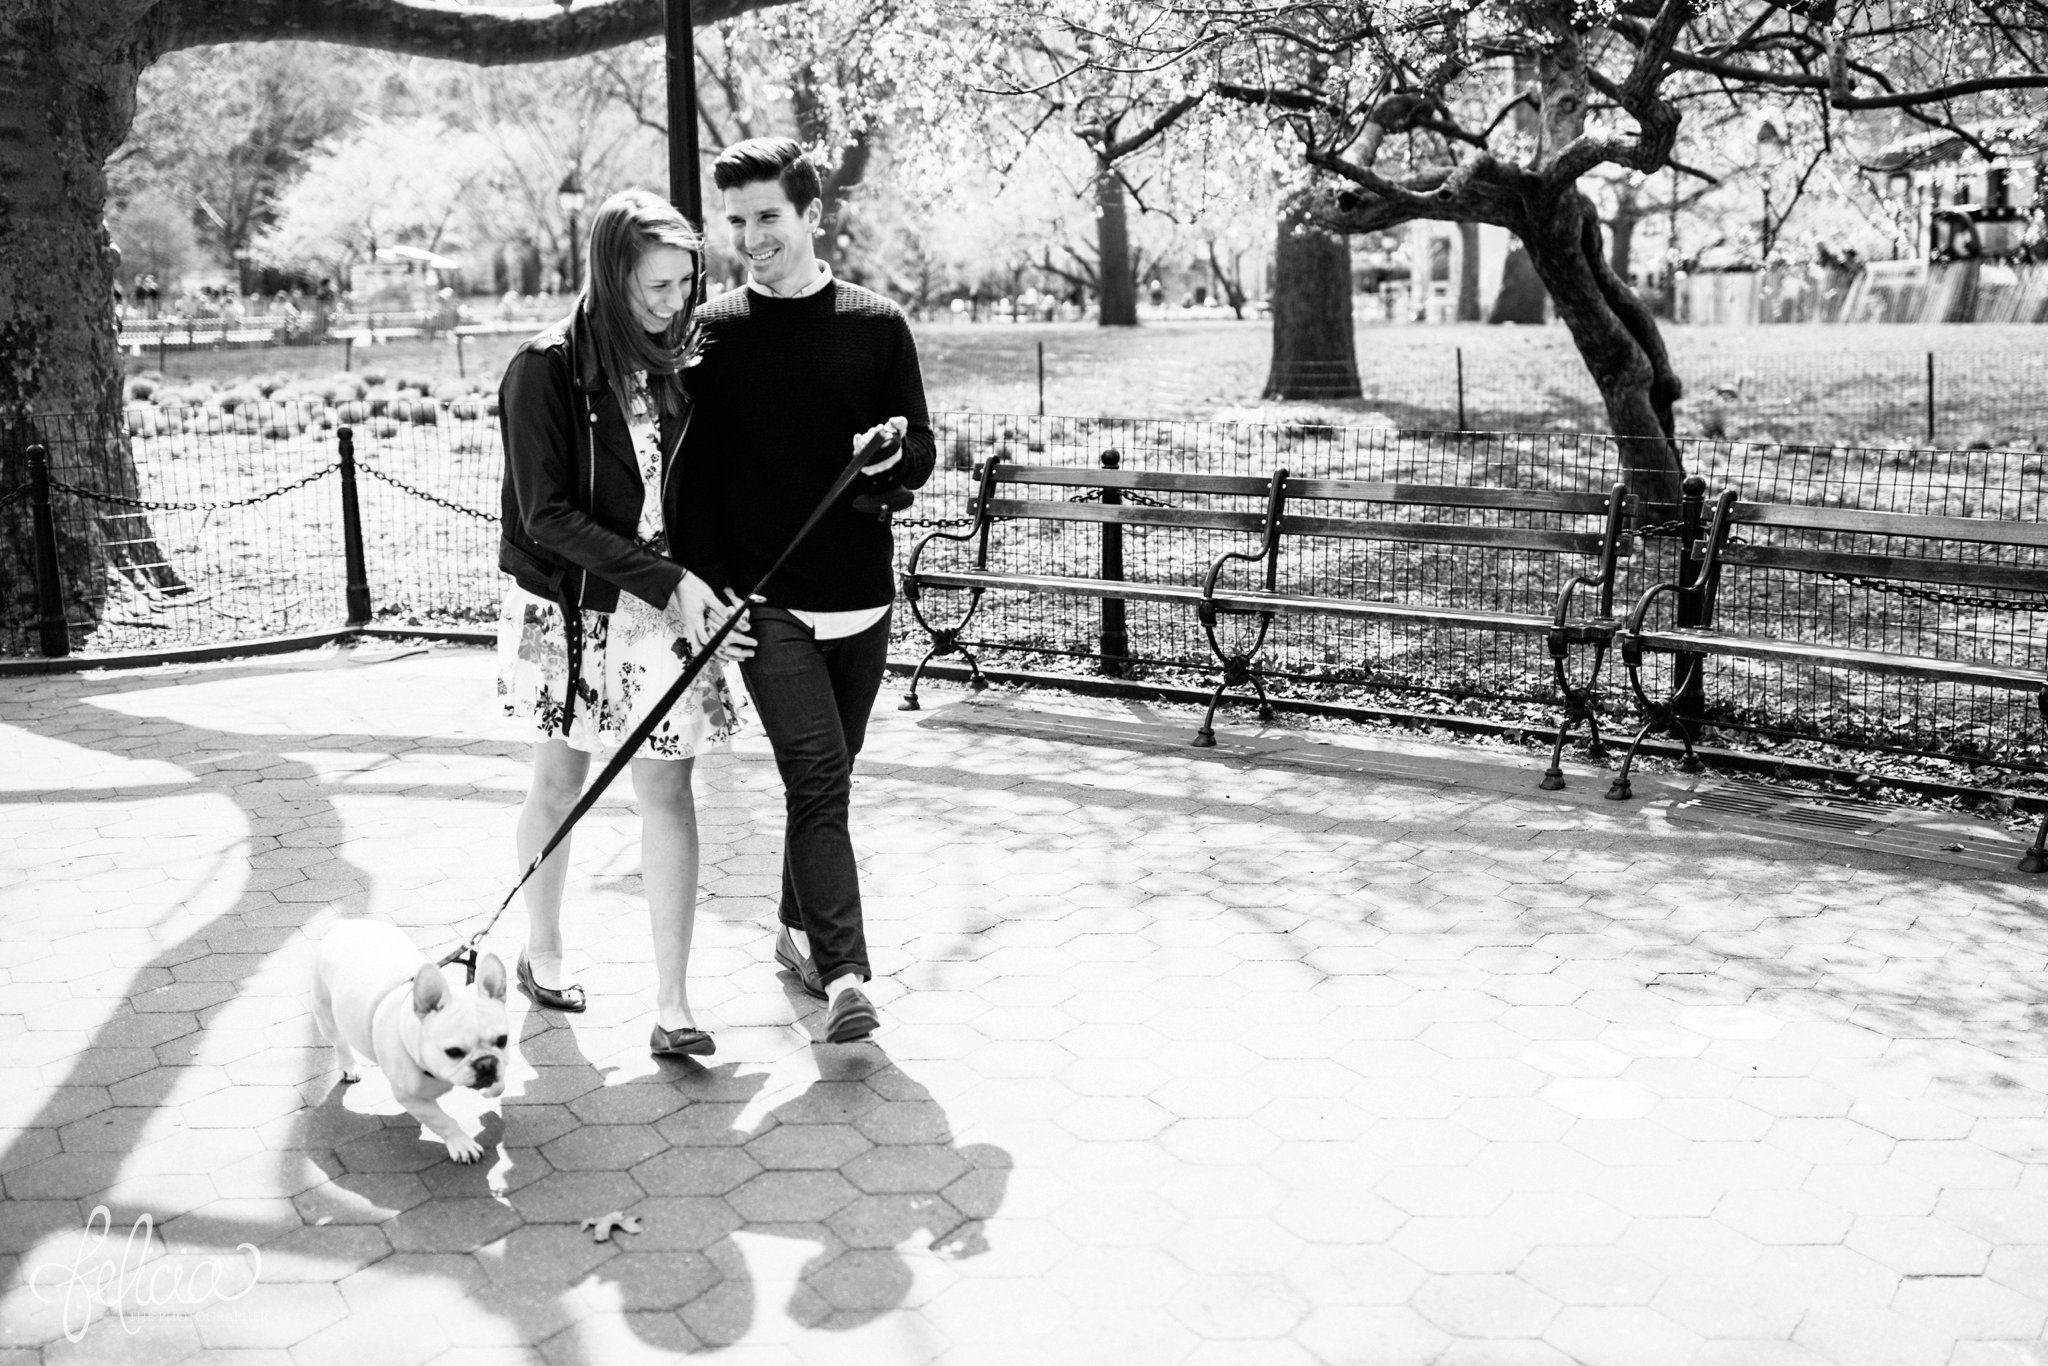 New York City Photography | wedding | New York City | West Village | black and white | candid bride and groom | New York City photography | wedding photography | images by feliciathephotographer.com | French Bulldog | candid engagement photos | engagement pictures with dog | engagement pictures in park | 